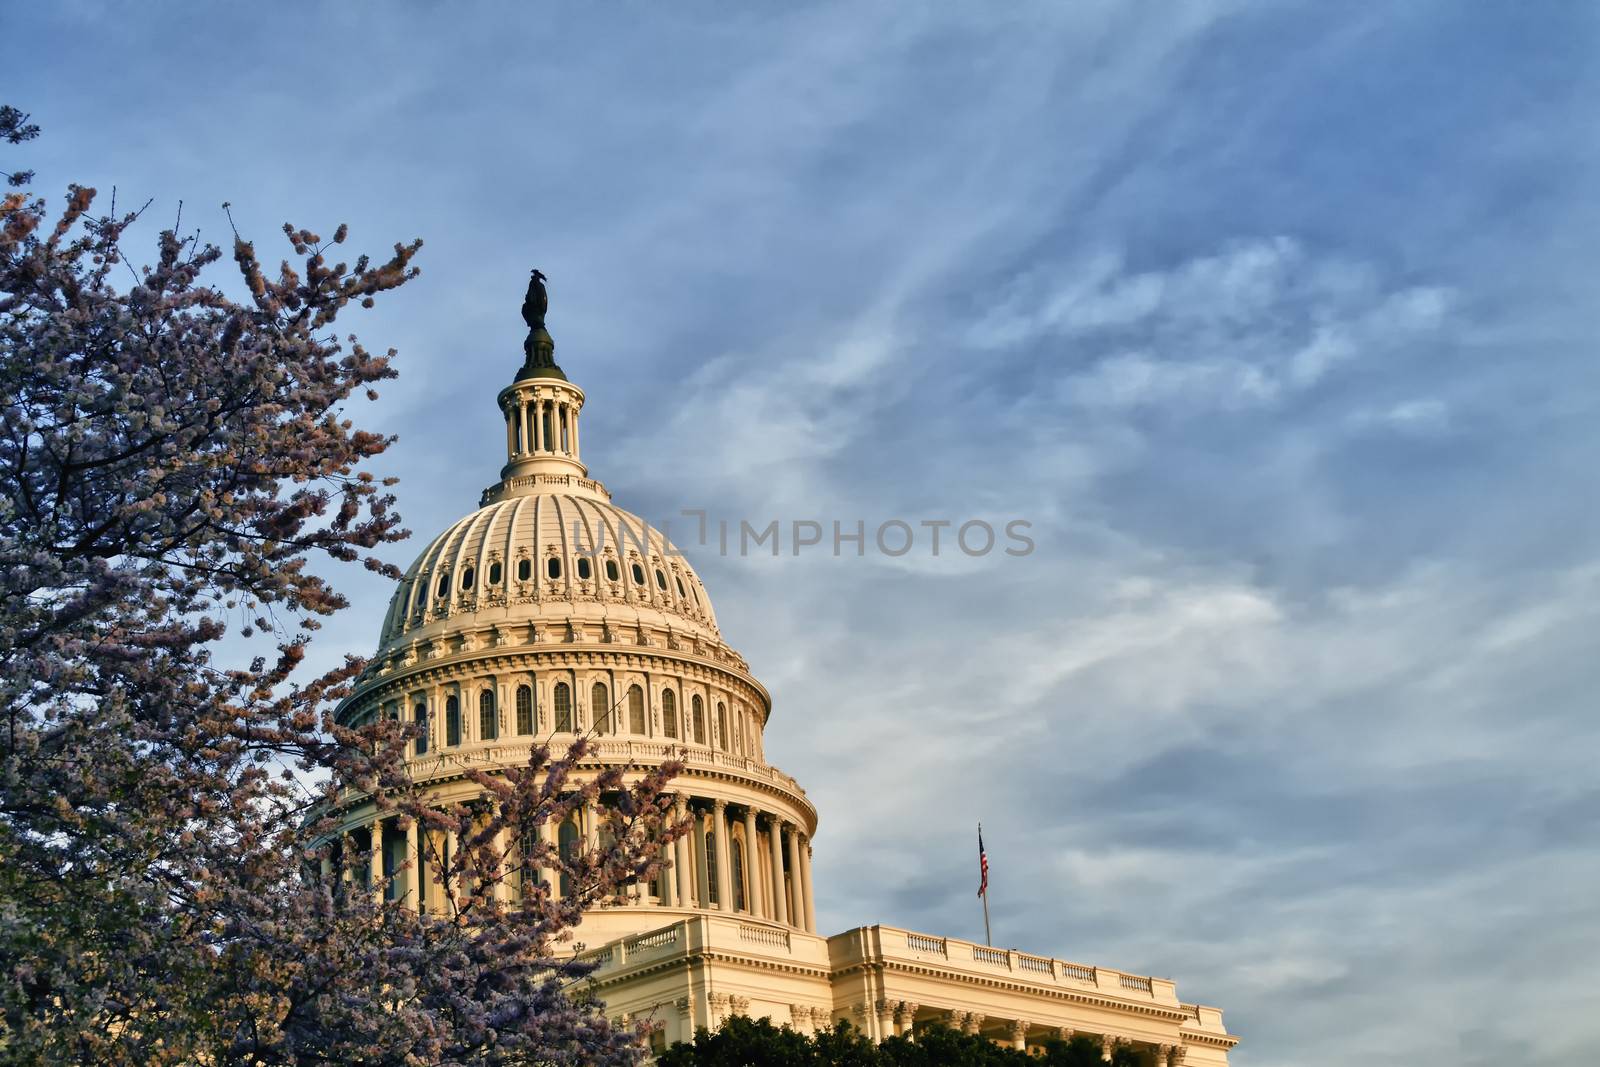 The United States Capitol Building Dome on the mall in Washington D.C.